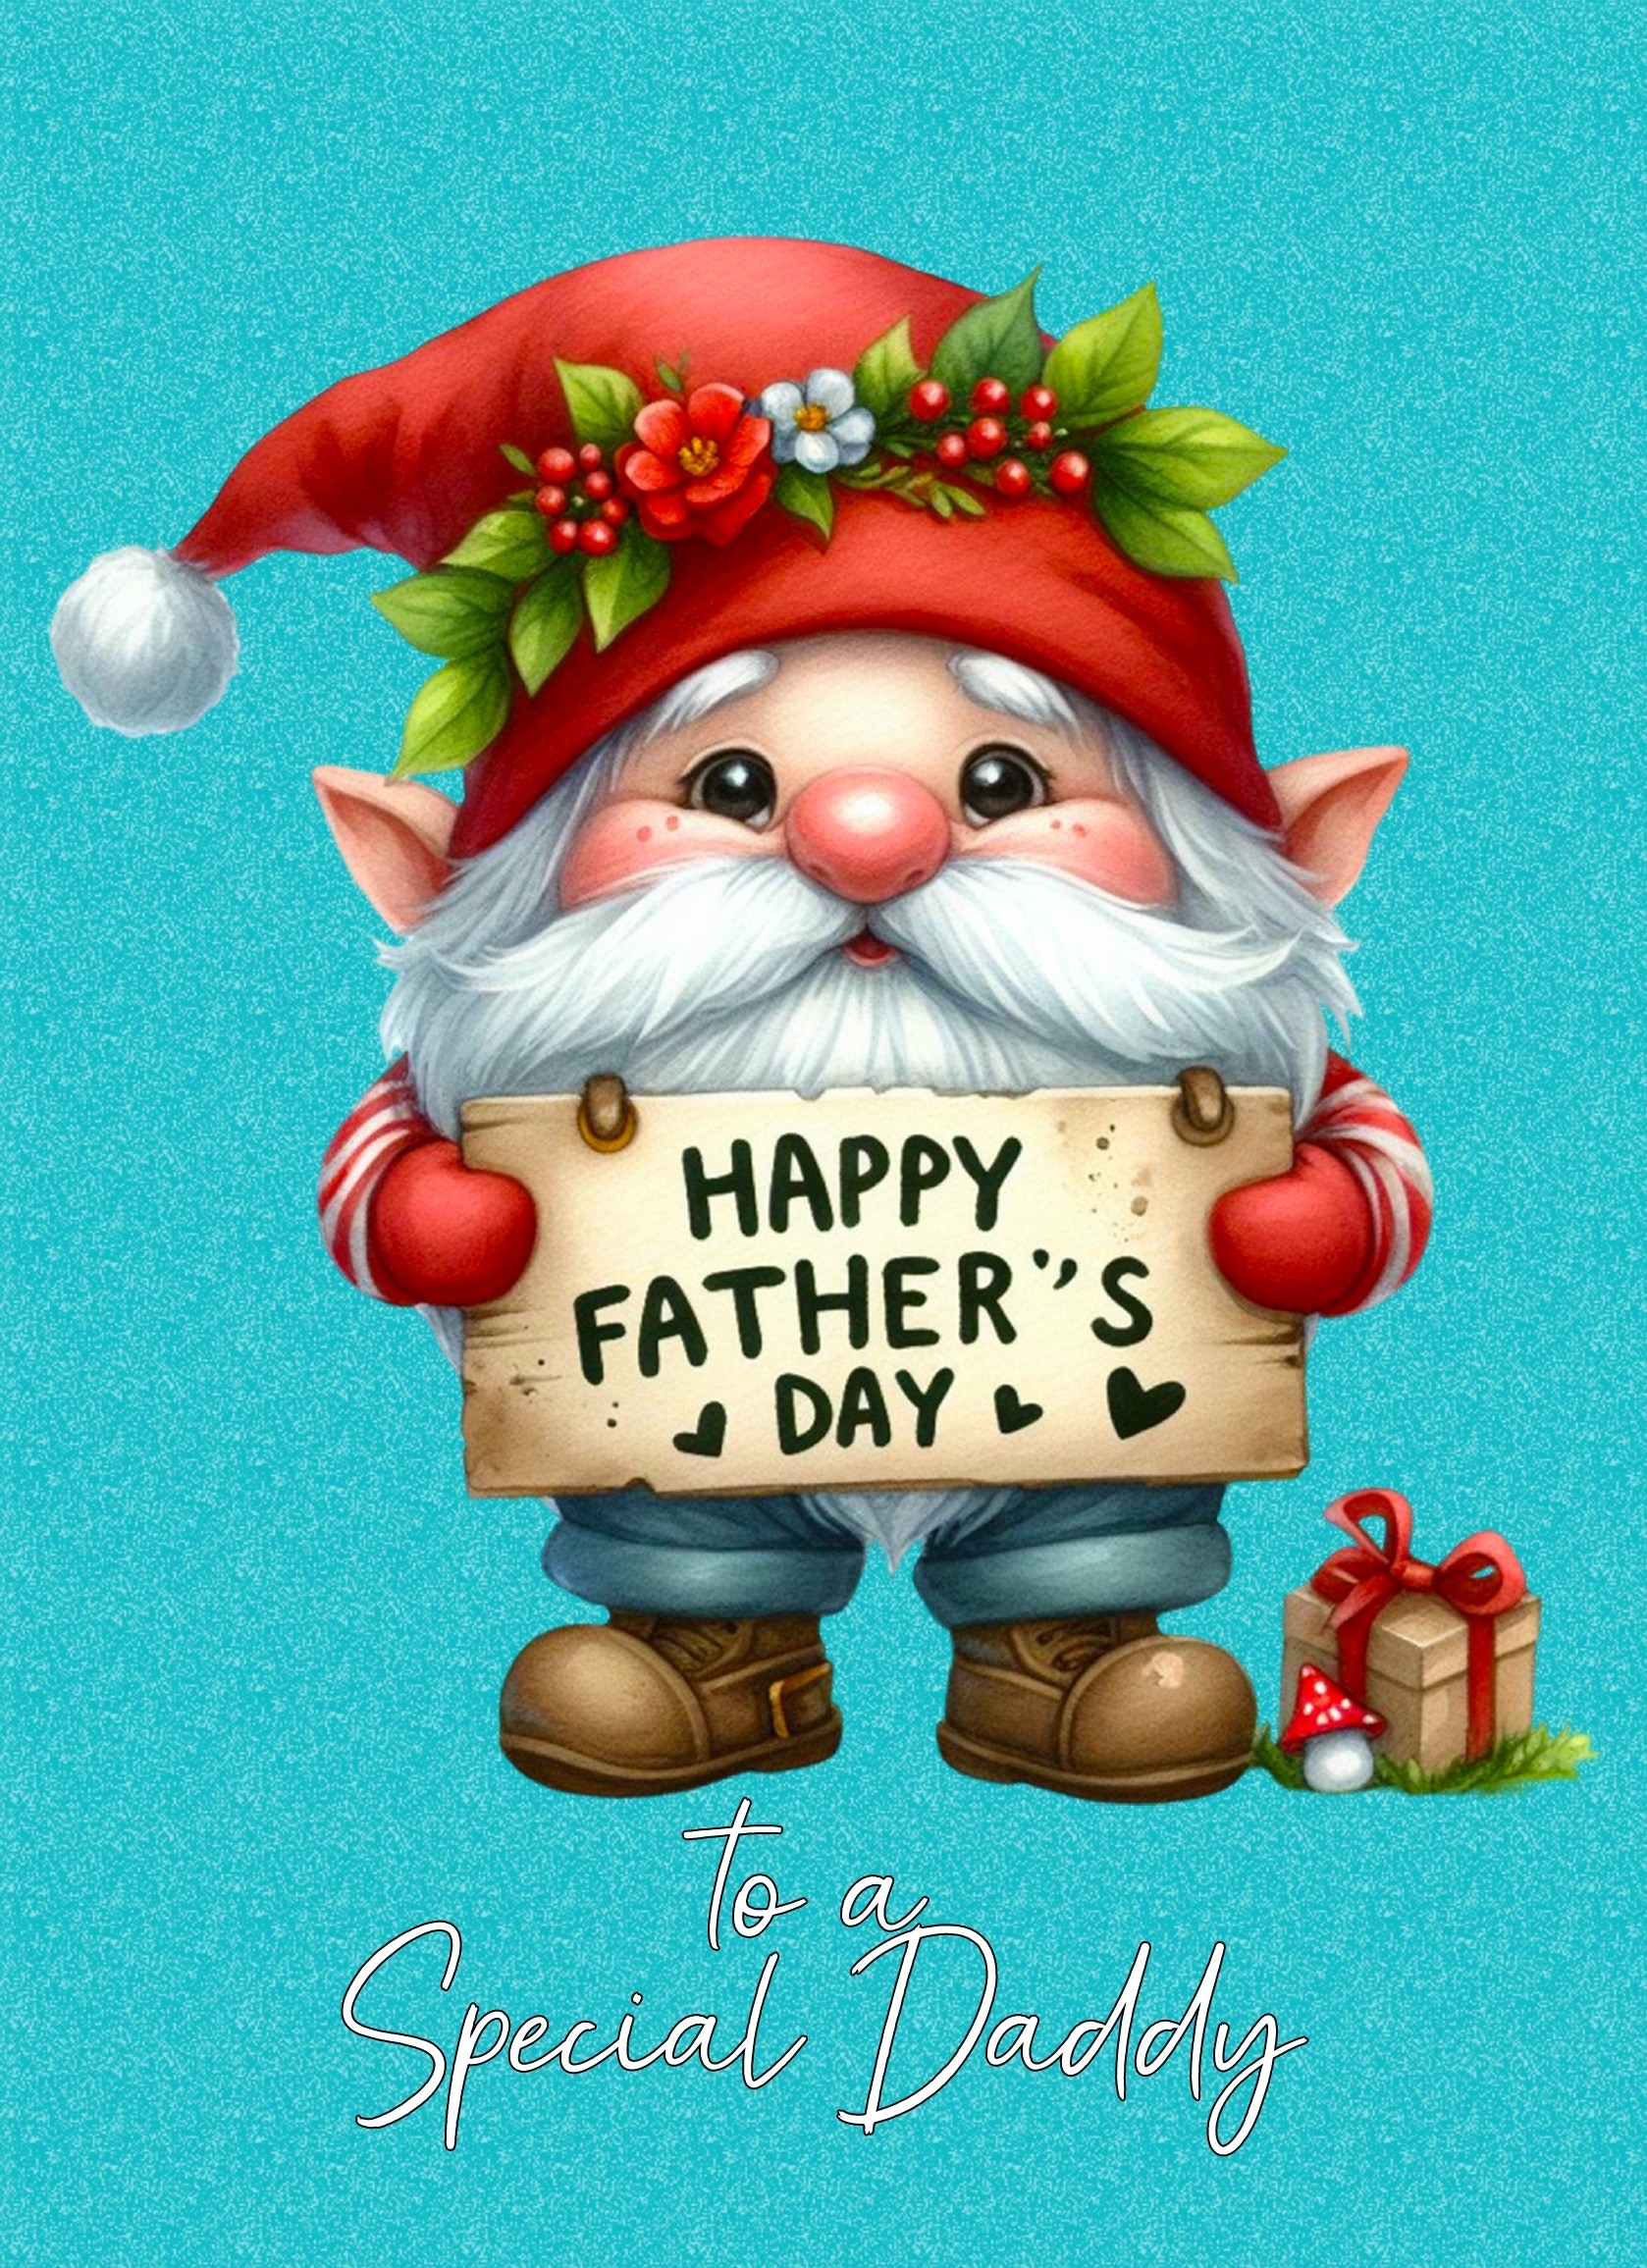 Gnome Funny Art Fathers Day Card For Daddy (Design 3)